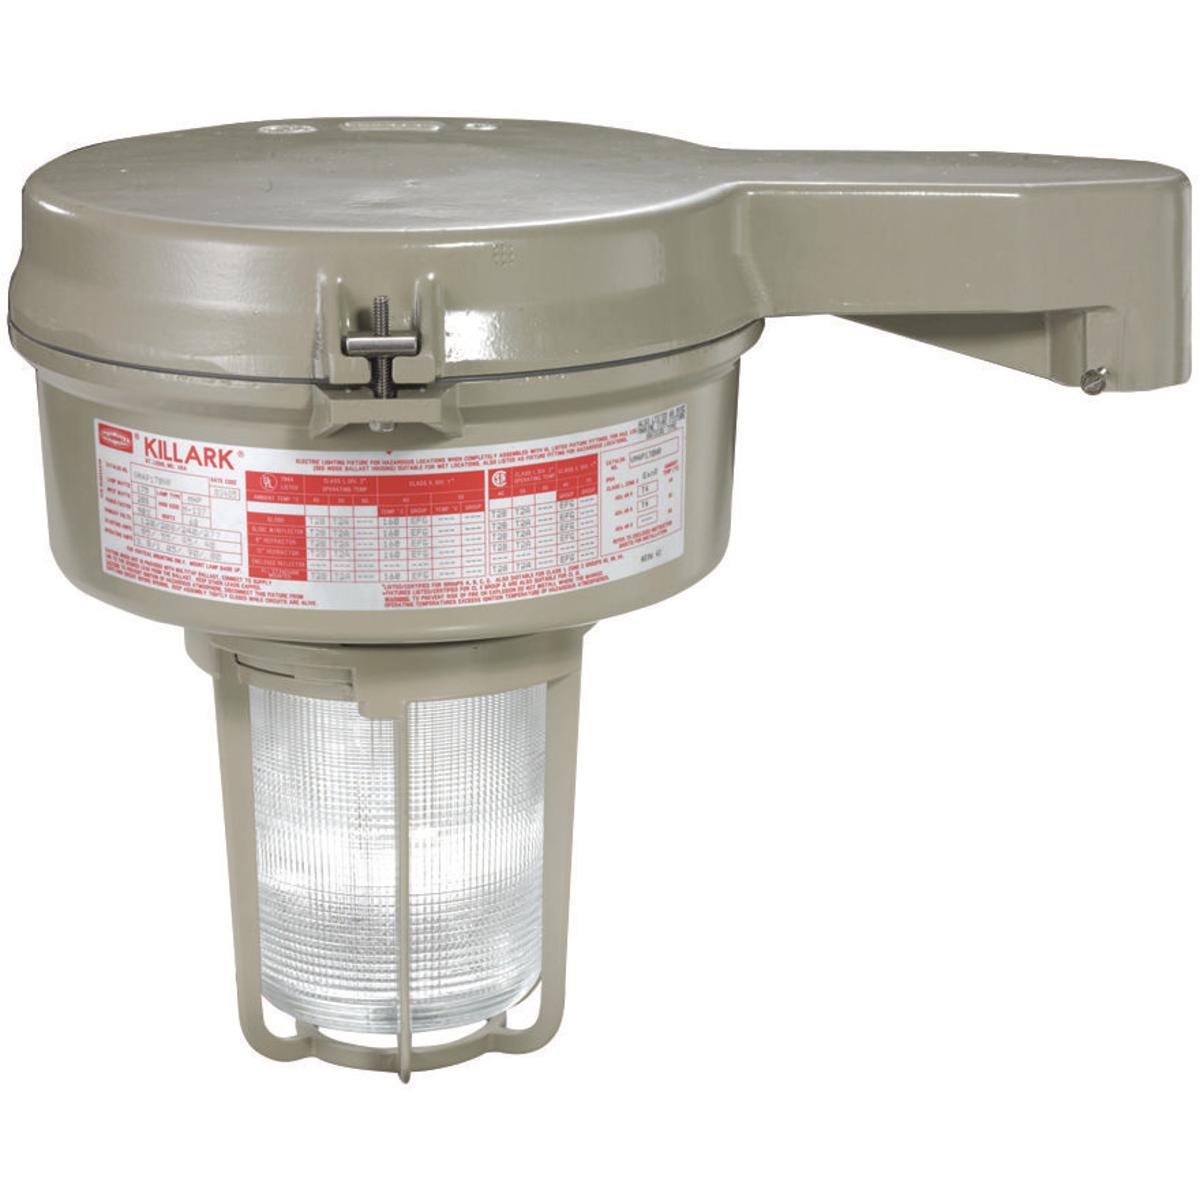 Hubbell VM3P150S5R5G VM3 Series - 150W Metal Halide Quadri-Volt - 1/1/2" Stanchion Mount - Type V Glass Refractor and Guard  ; Ballast tank and splice box – corrosion resistant copper-free aluminum alloy with baked powder epoxy/polyester finish, electrostatically applied for 